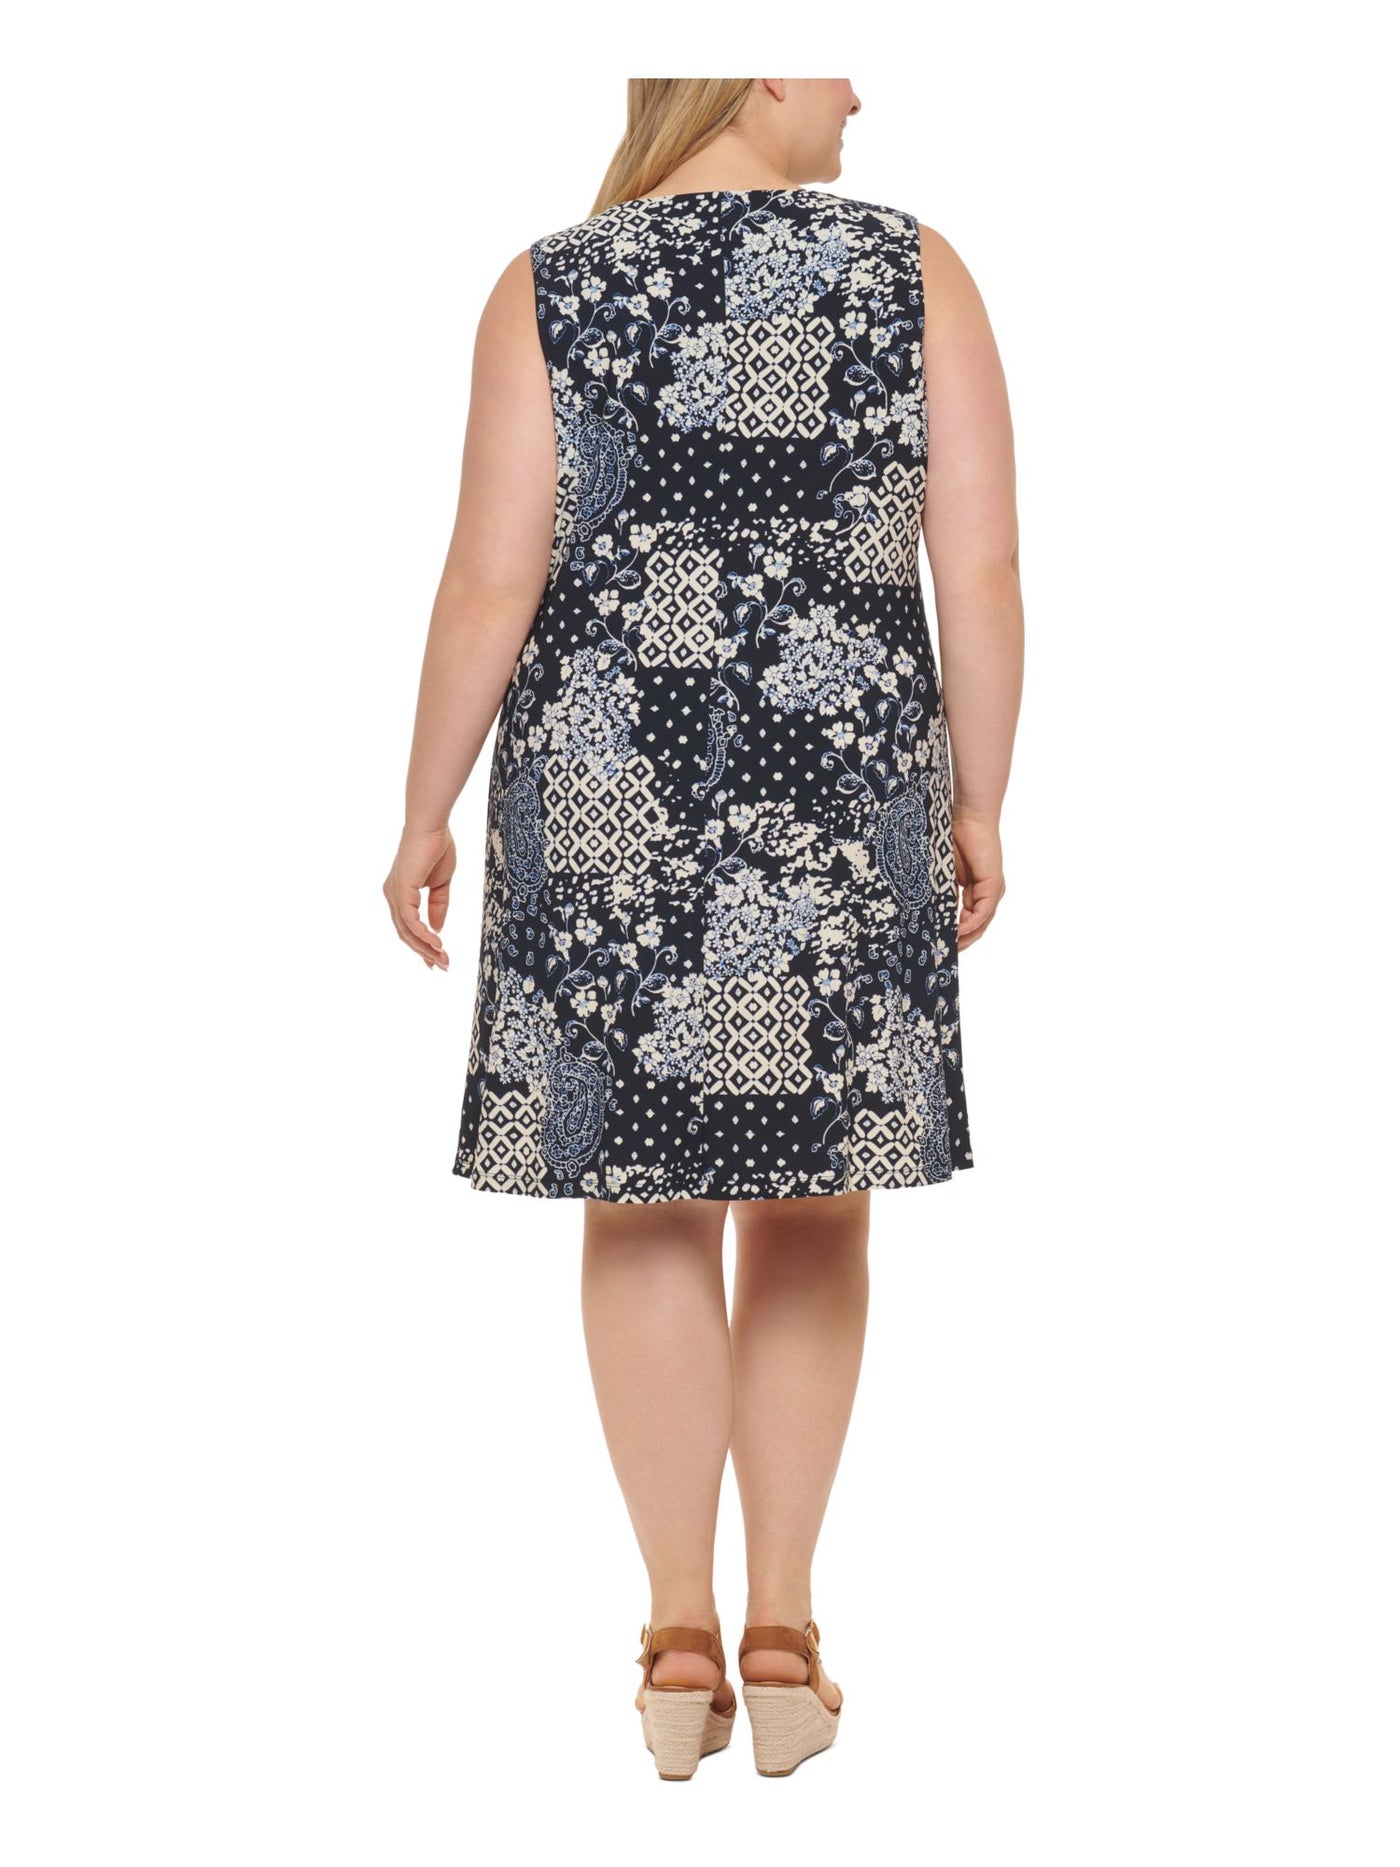 TOMMY HILFIGER Womens Navy Printed Sleeveless Round Neck Above The Knee Shift Dress Plus 22W